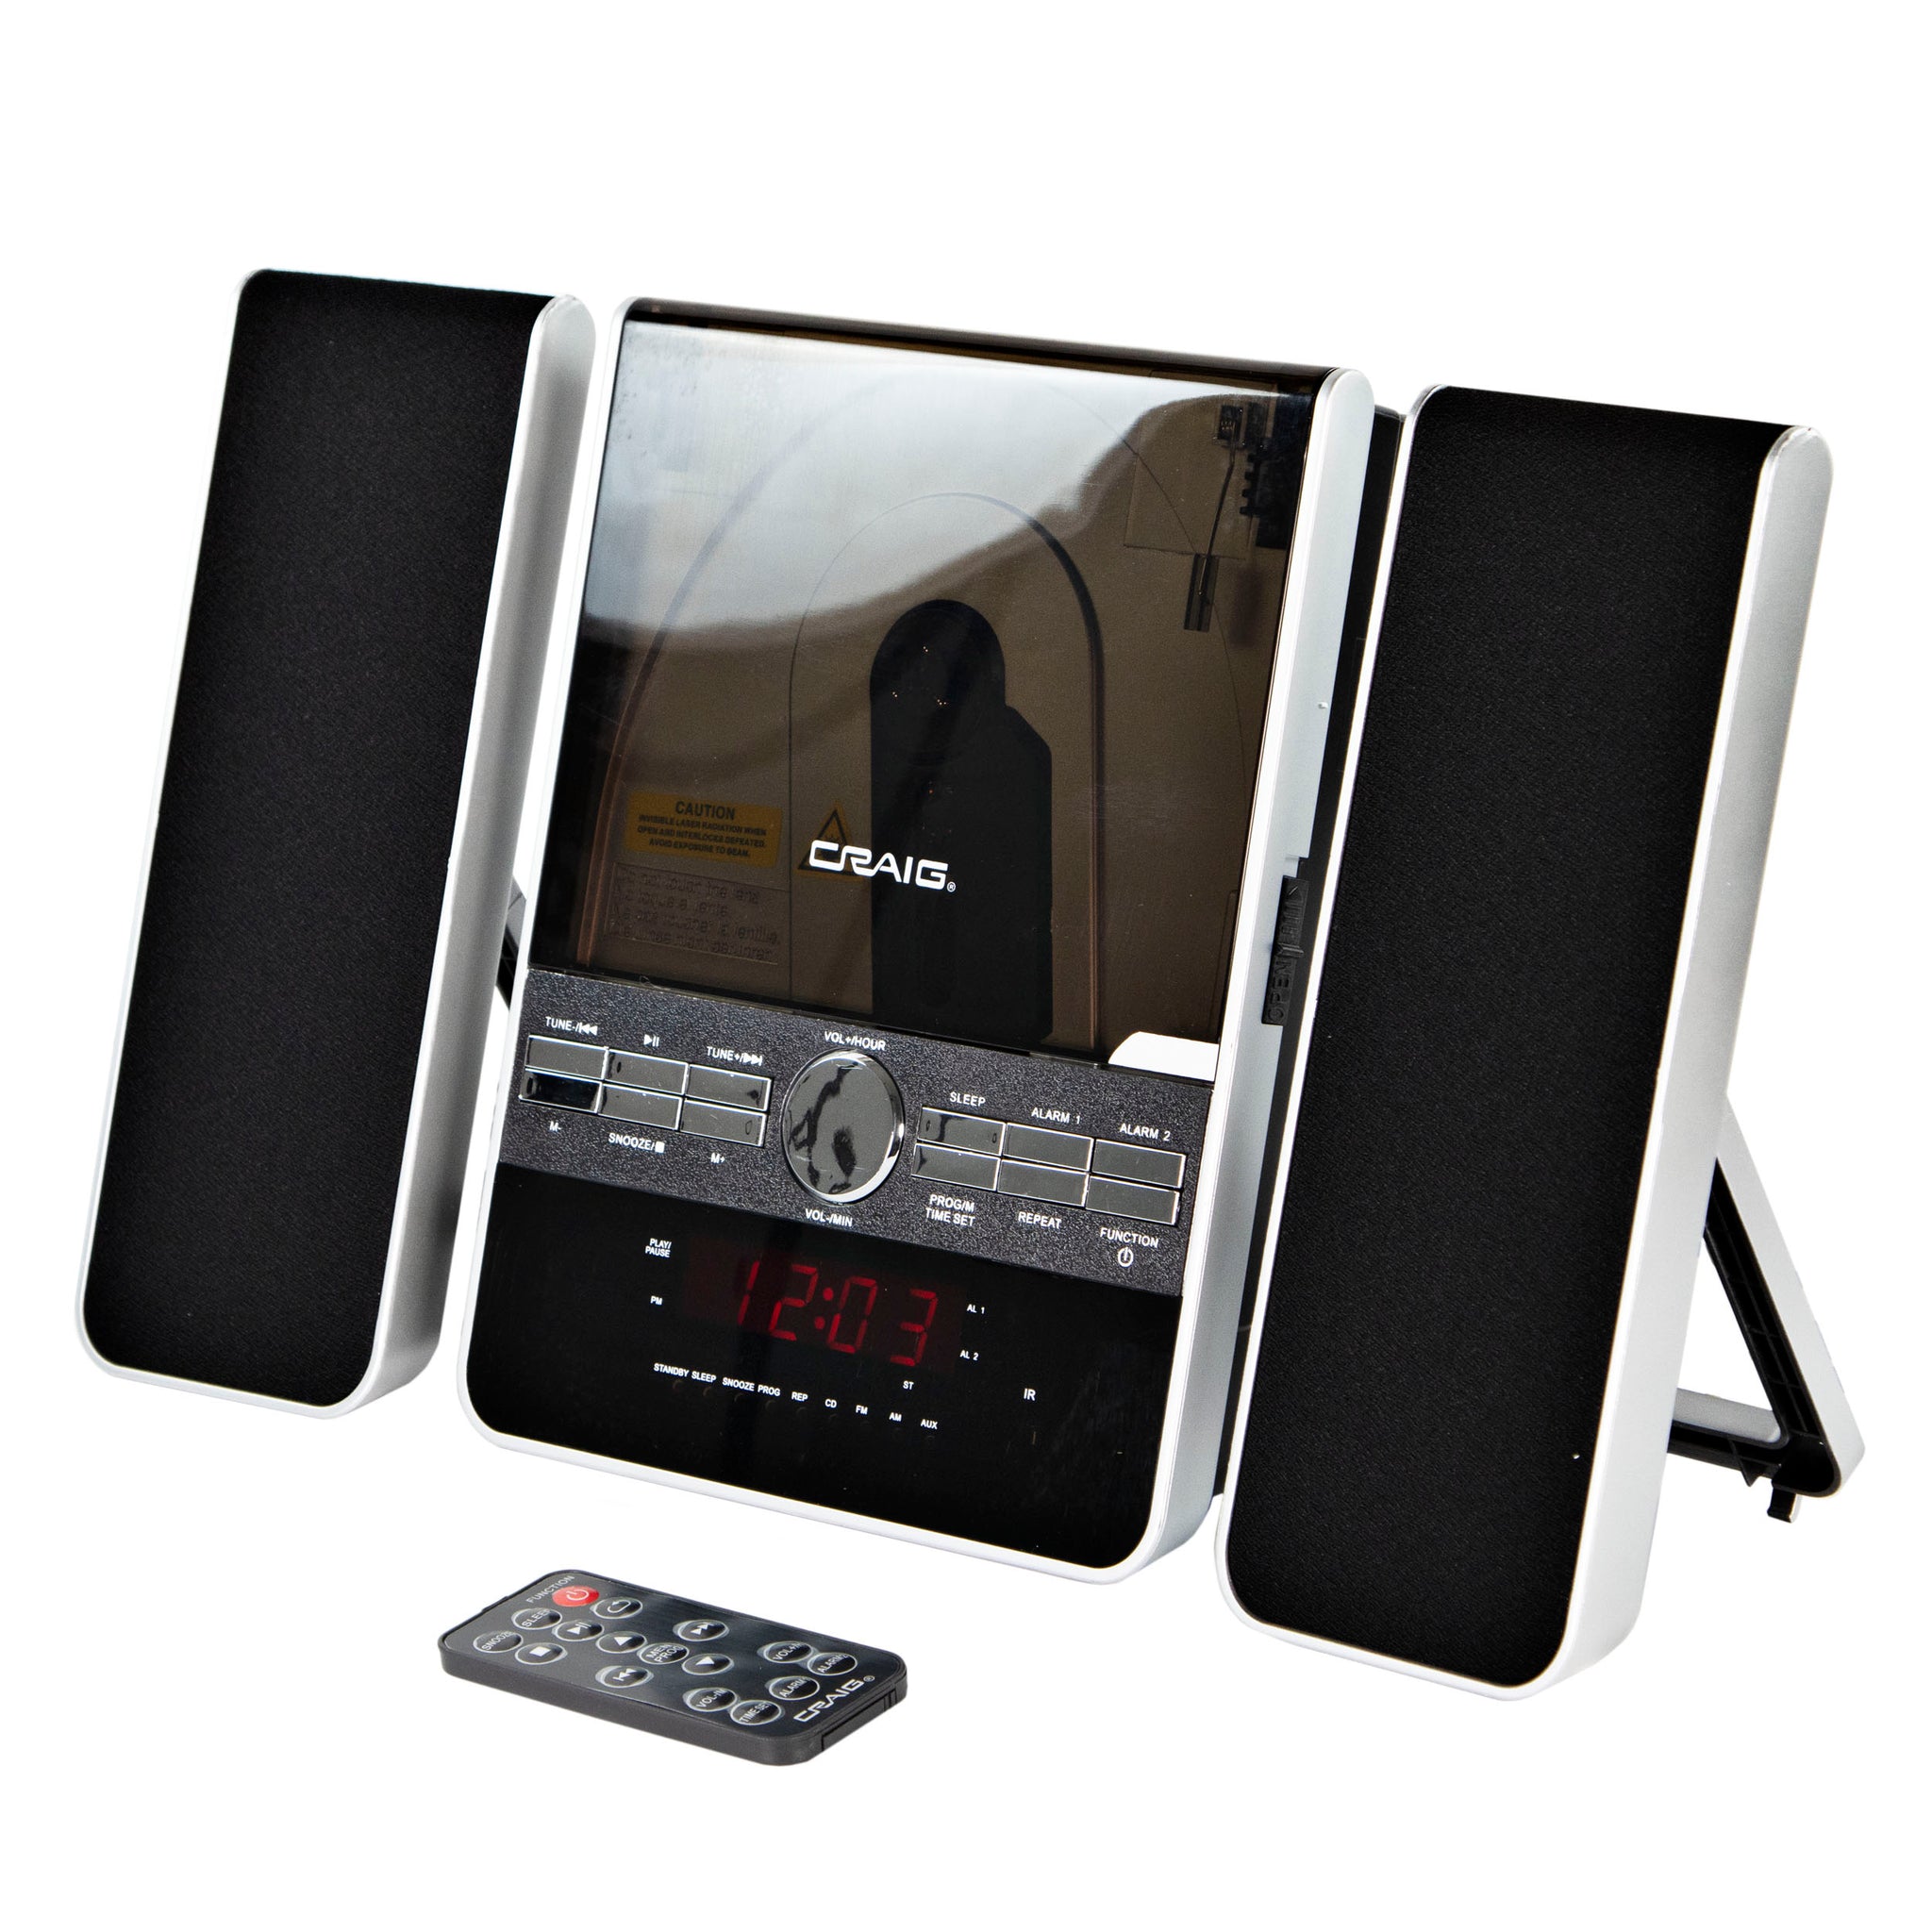 Craig CM427 3-Piece Vertical CD Stereo Shelf System with AM/FM and